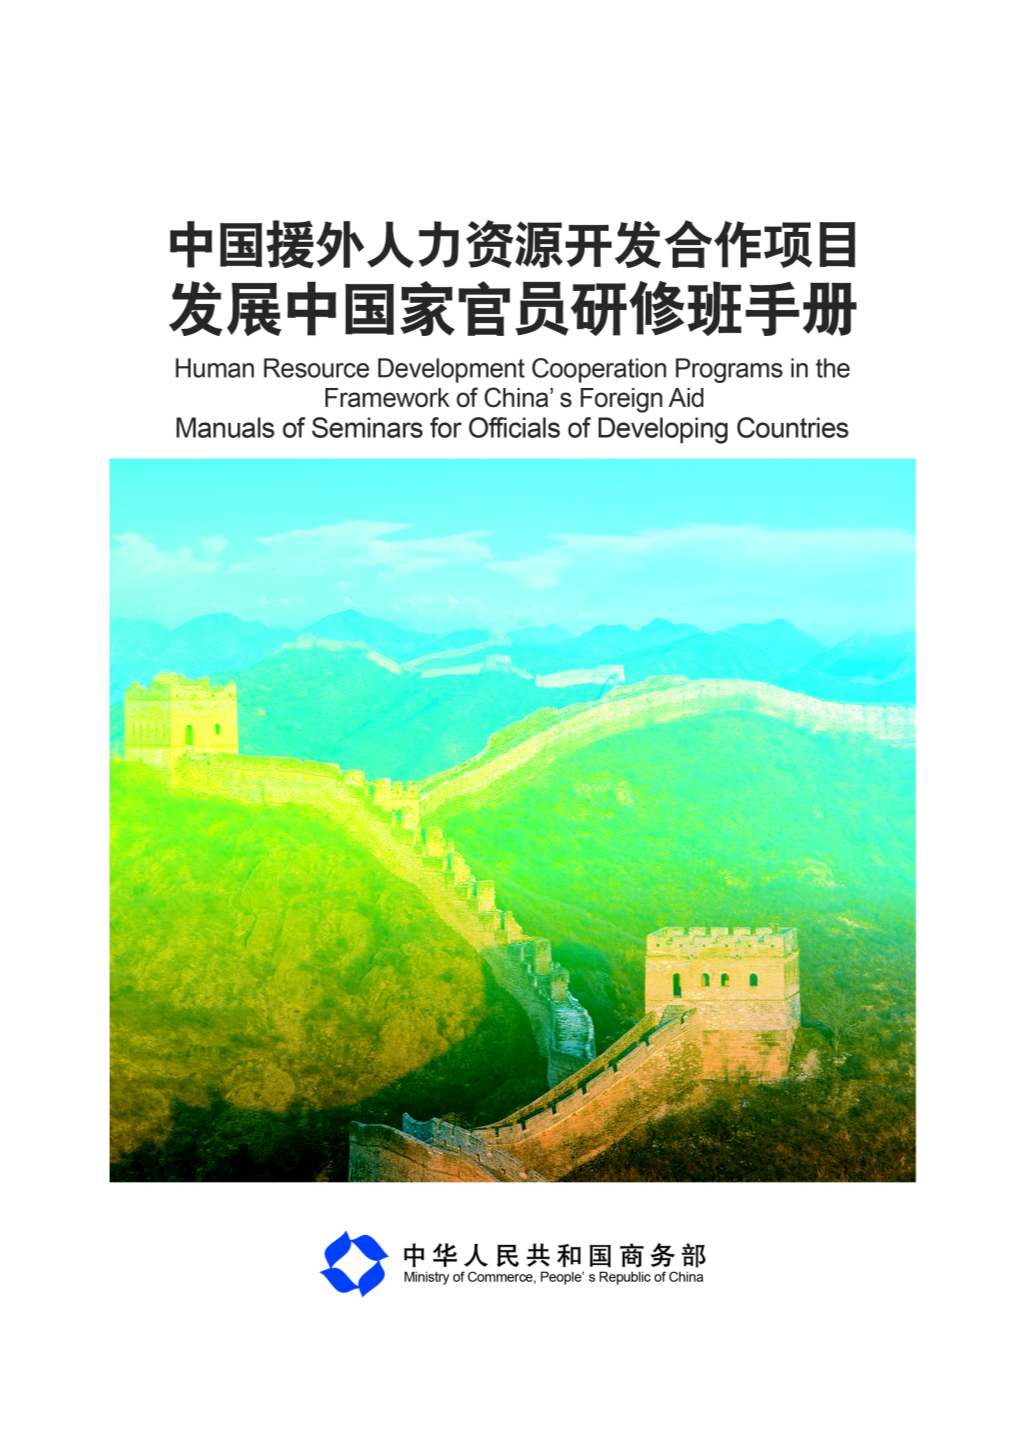 Human Resource Development Cooperation Programs in the Framework of China S Foreign Aid